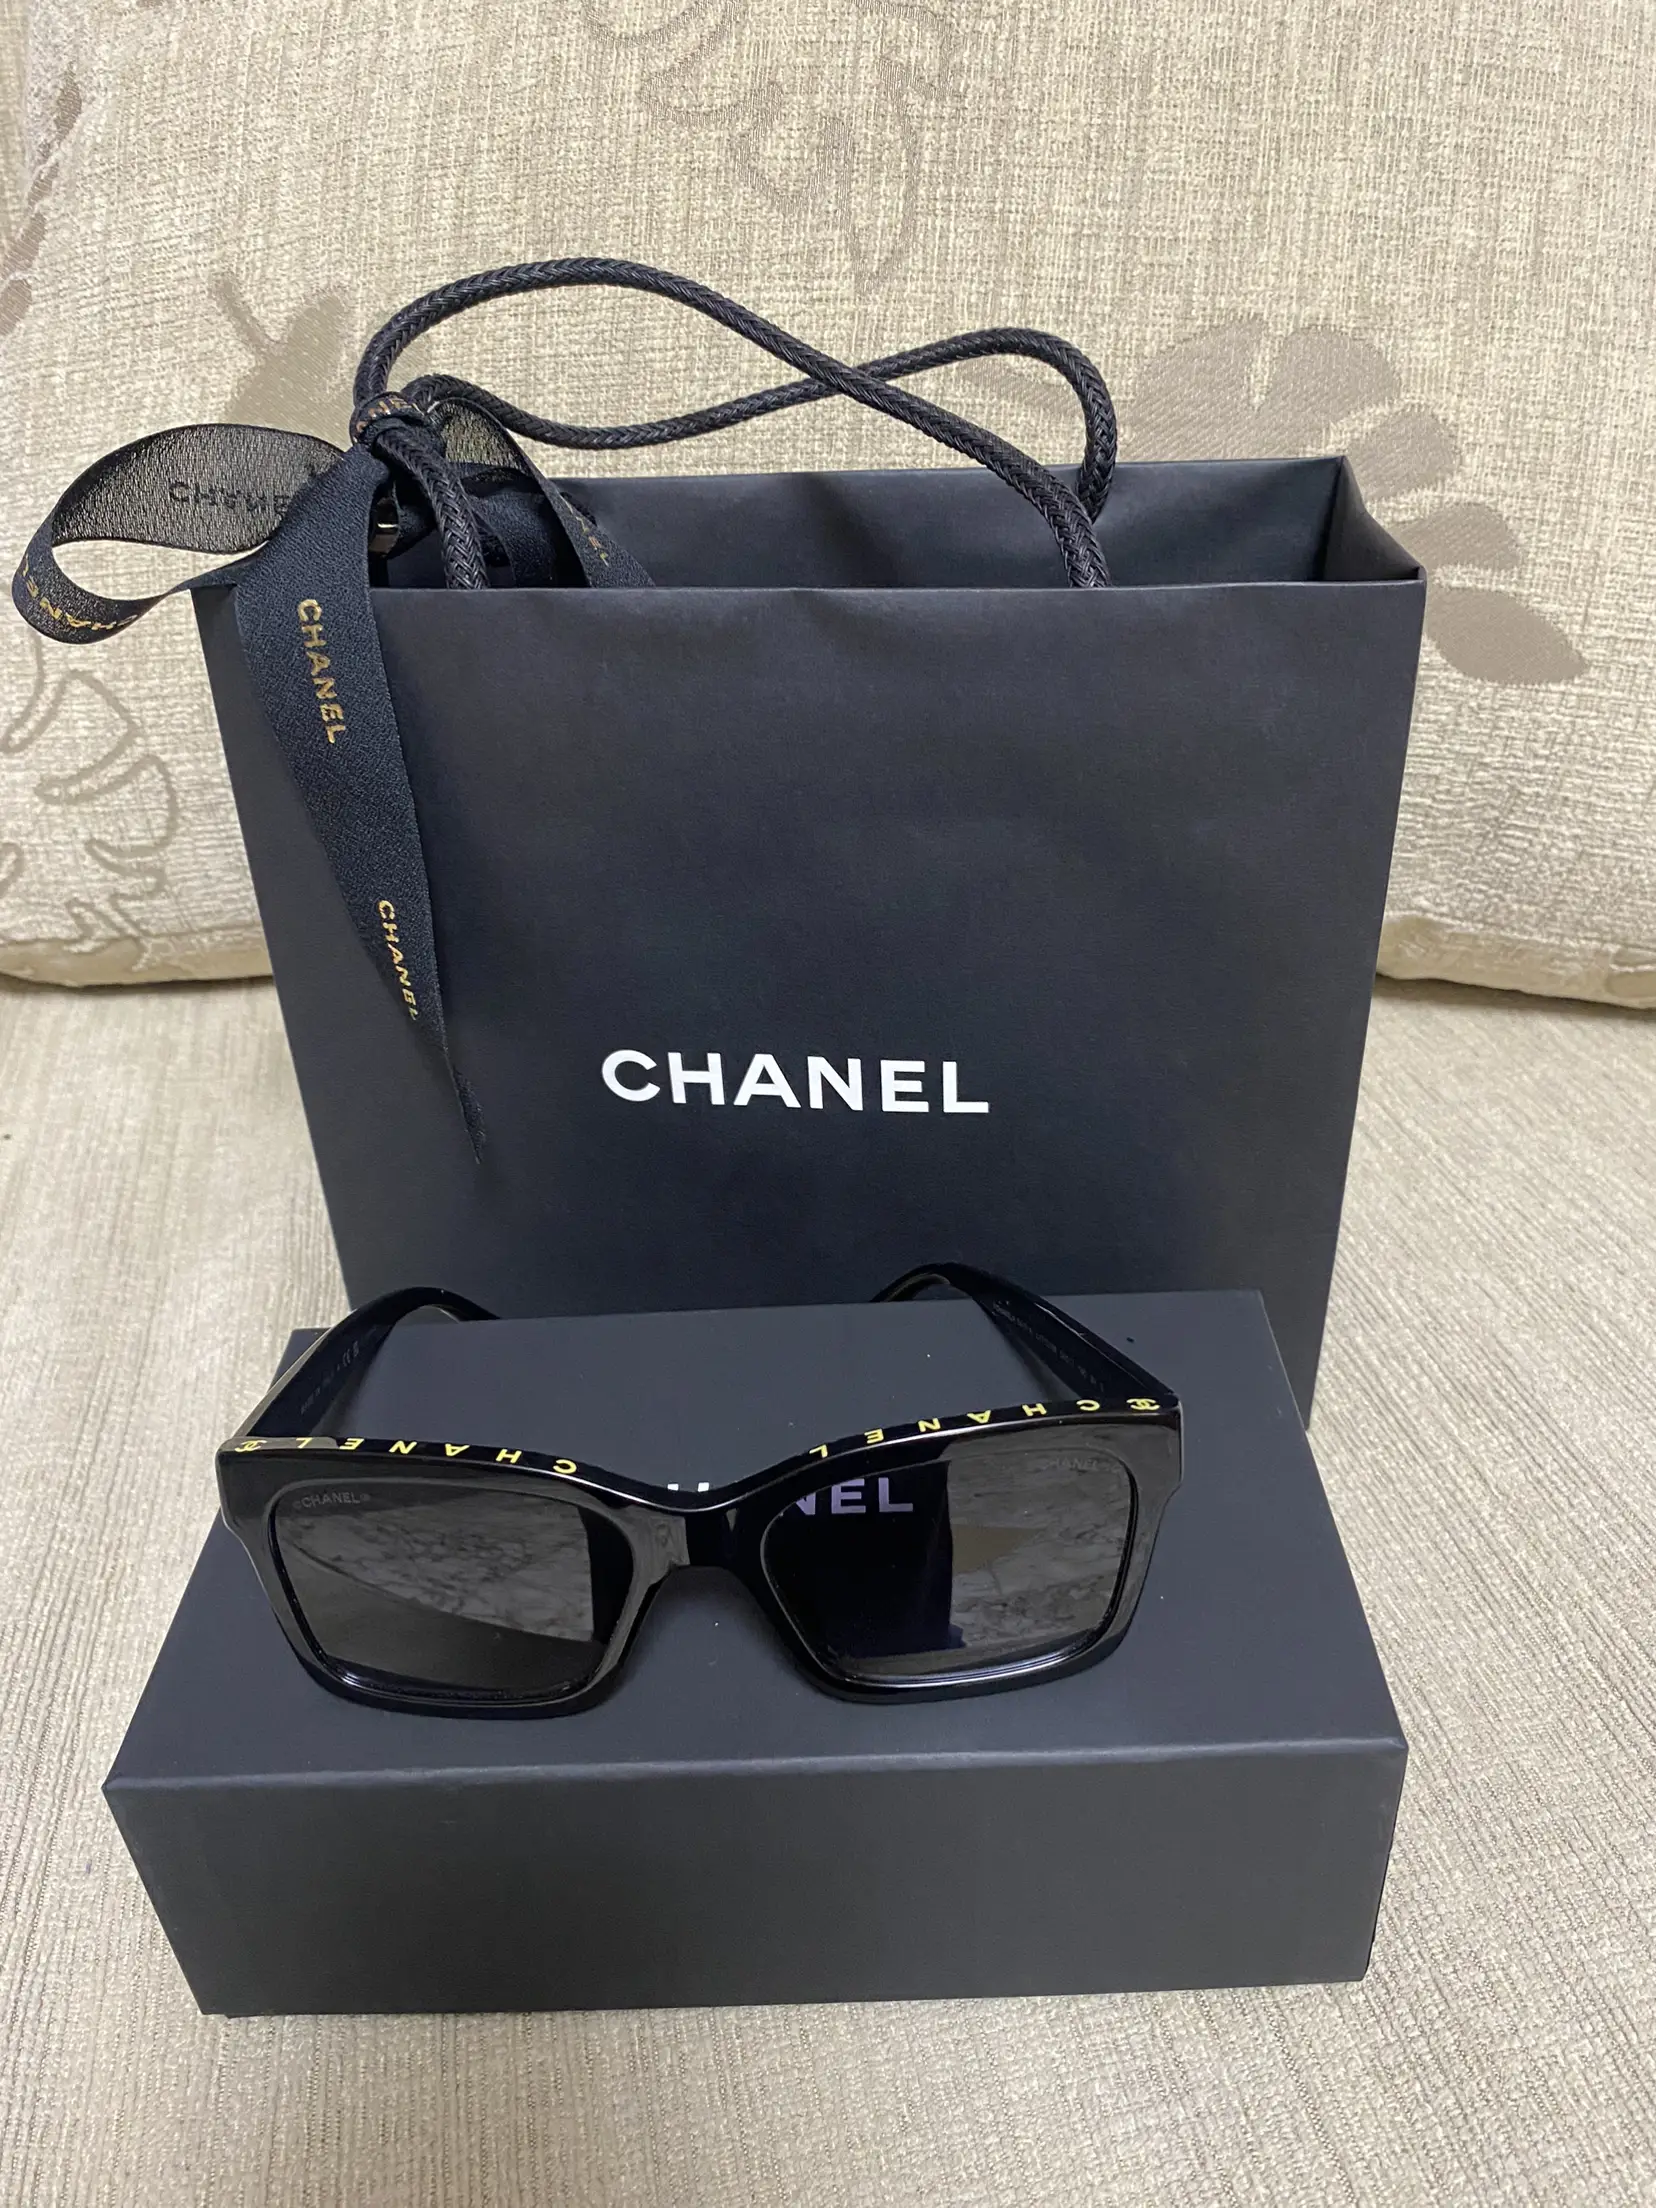 Chanel Sunglasses, Gallery posted by Oungice